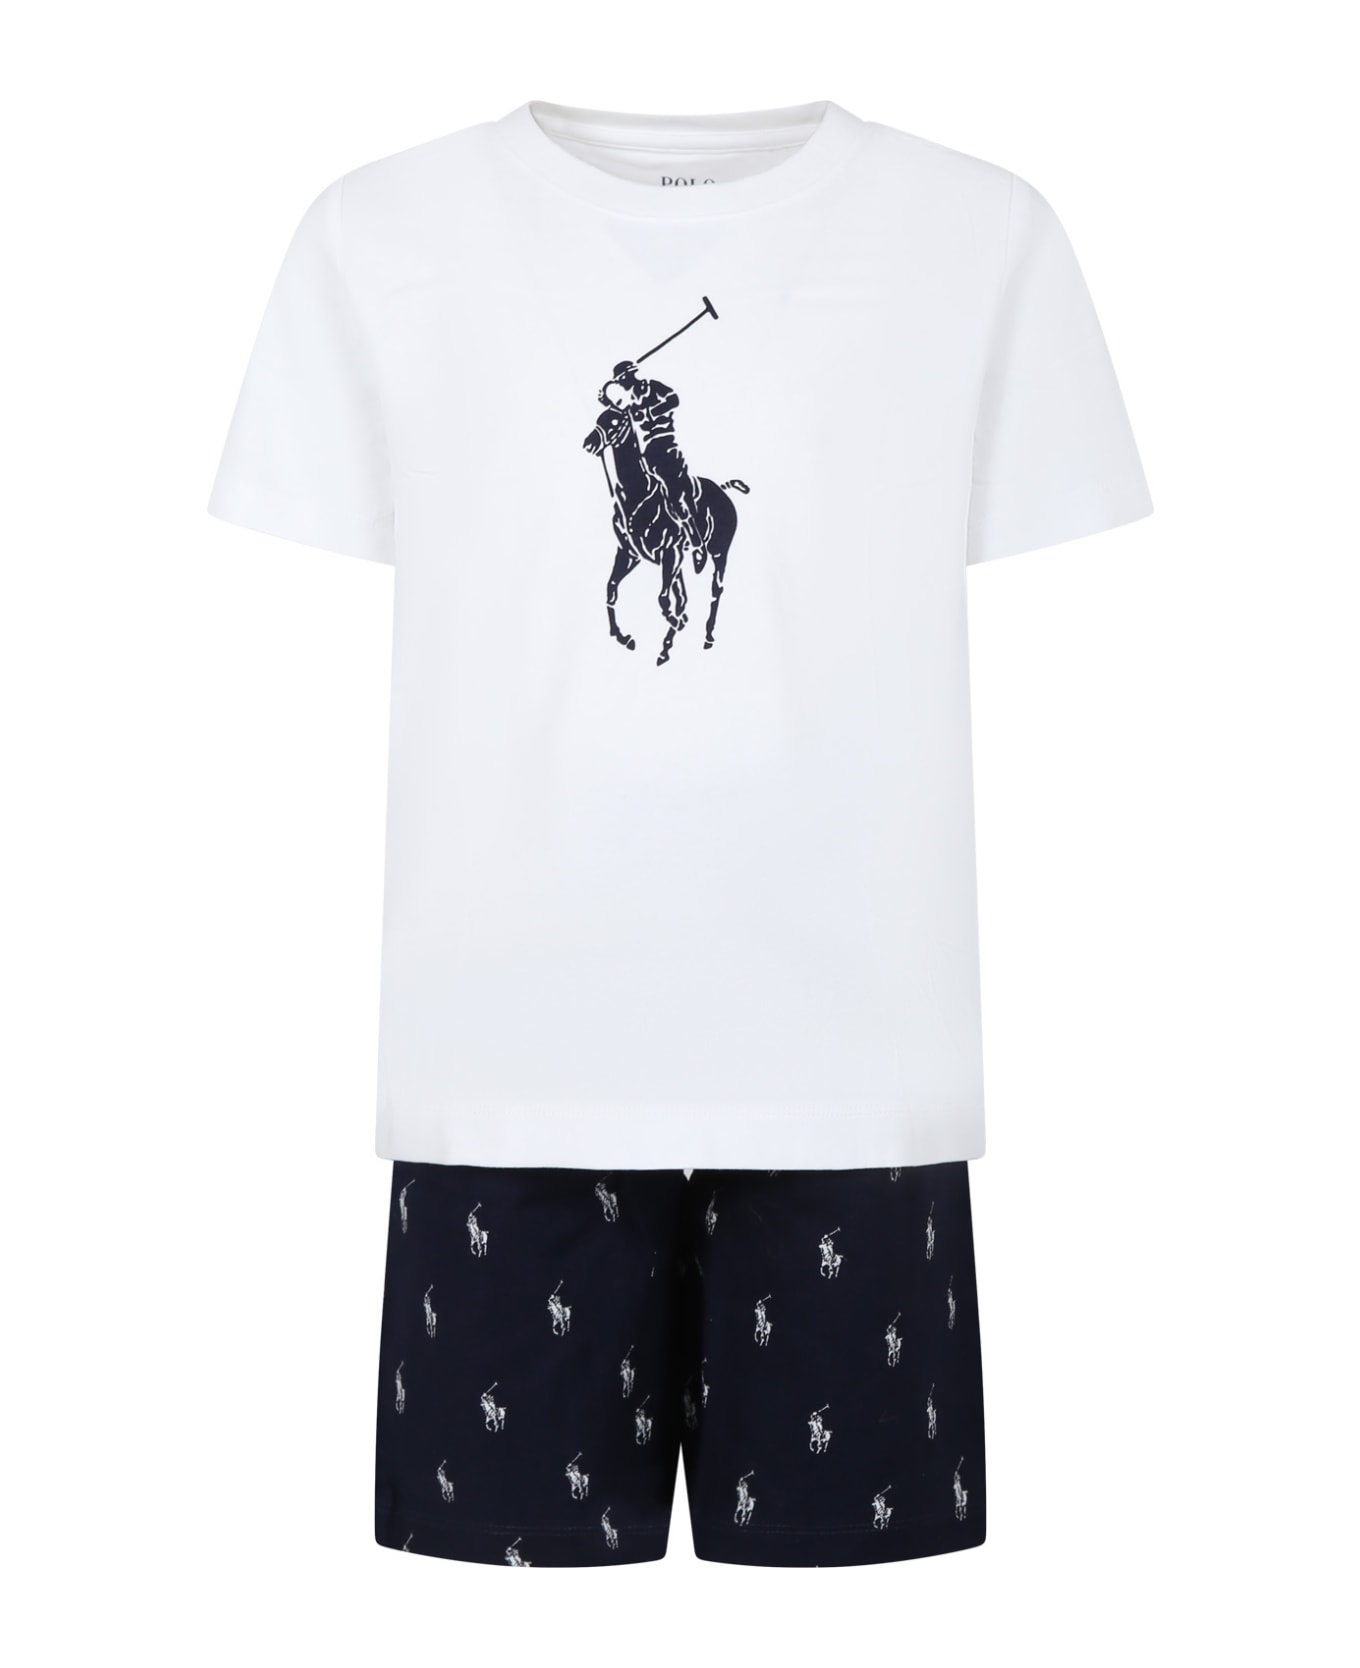 Ralph Lauren Blue Pajamas For Boy With Pony - Blue